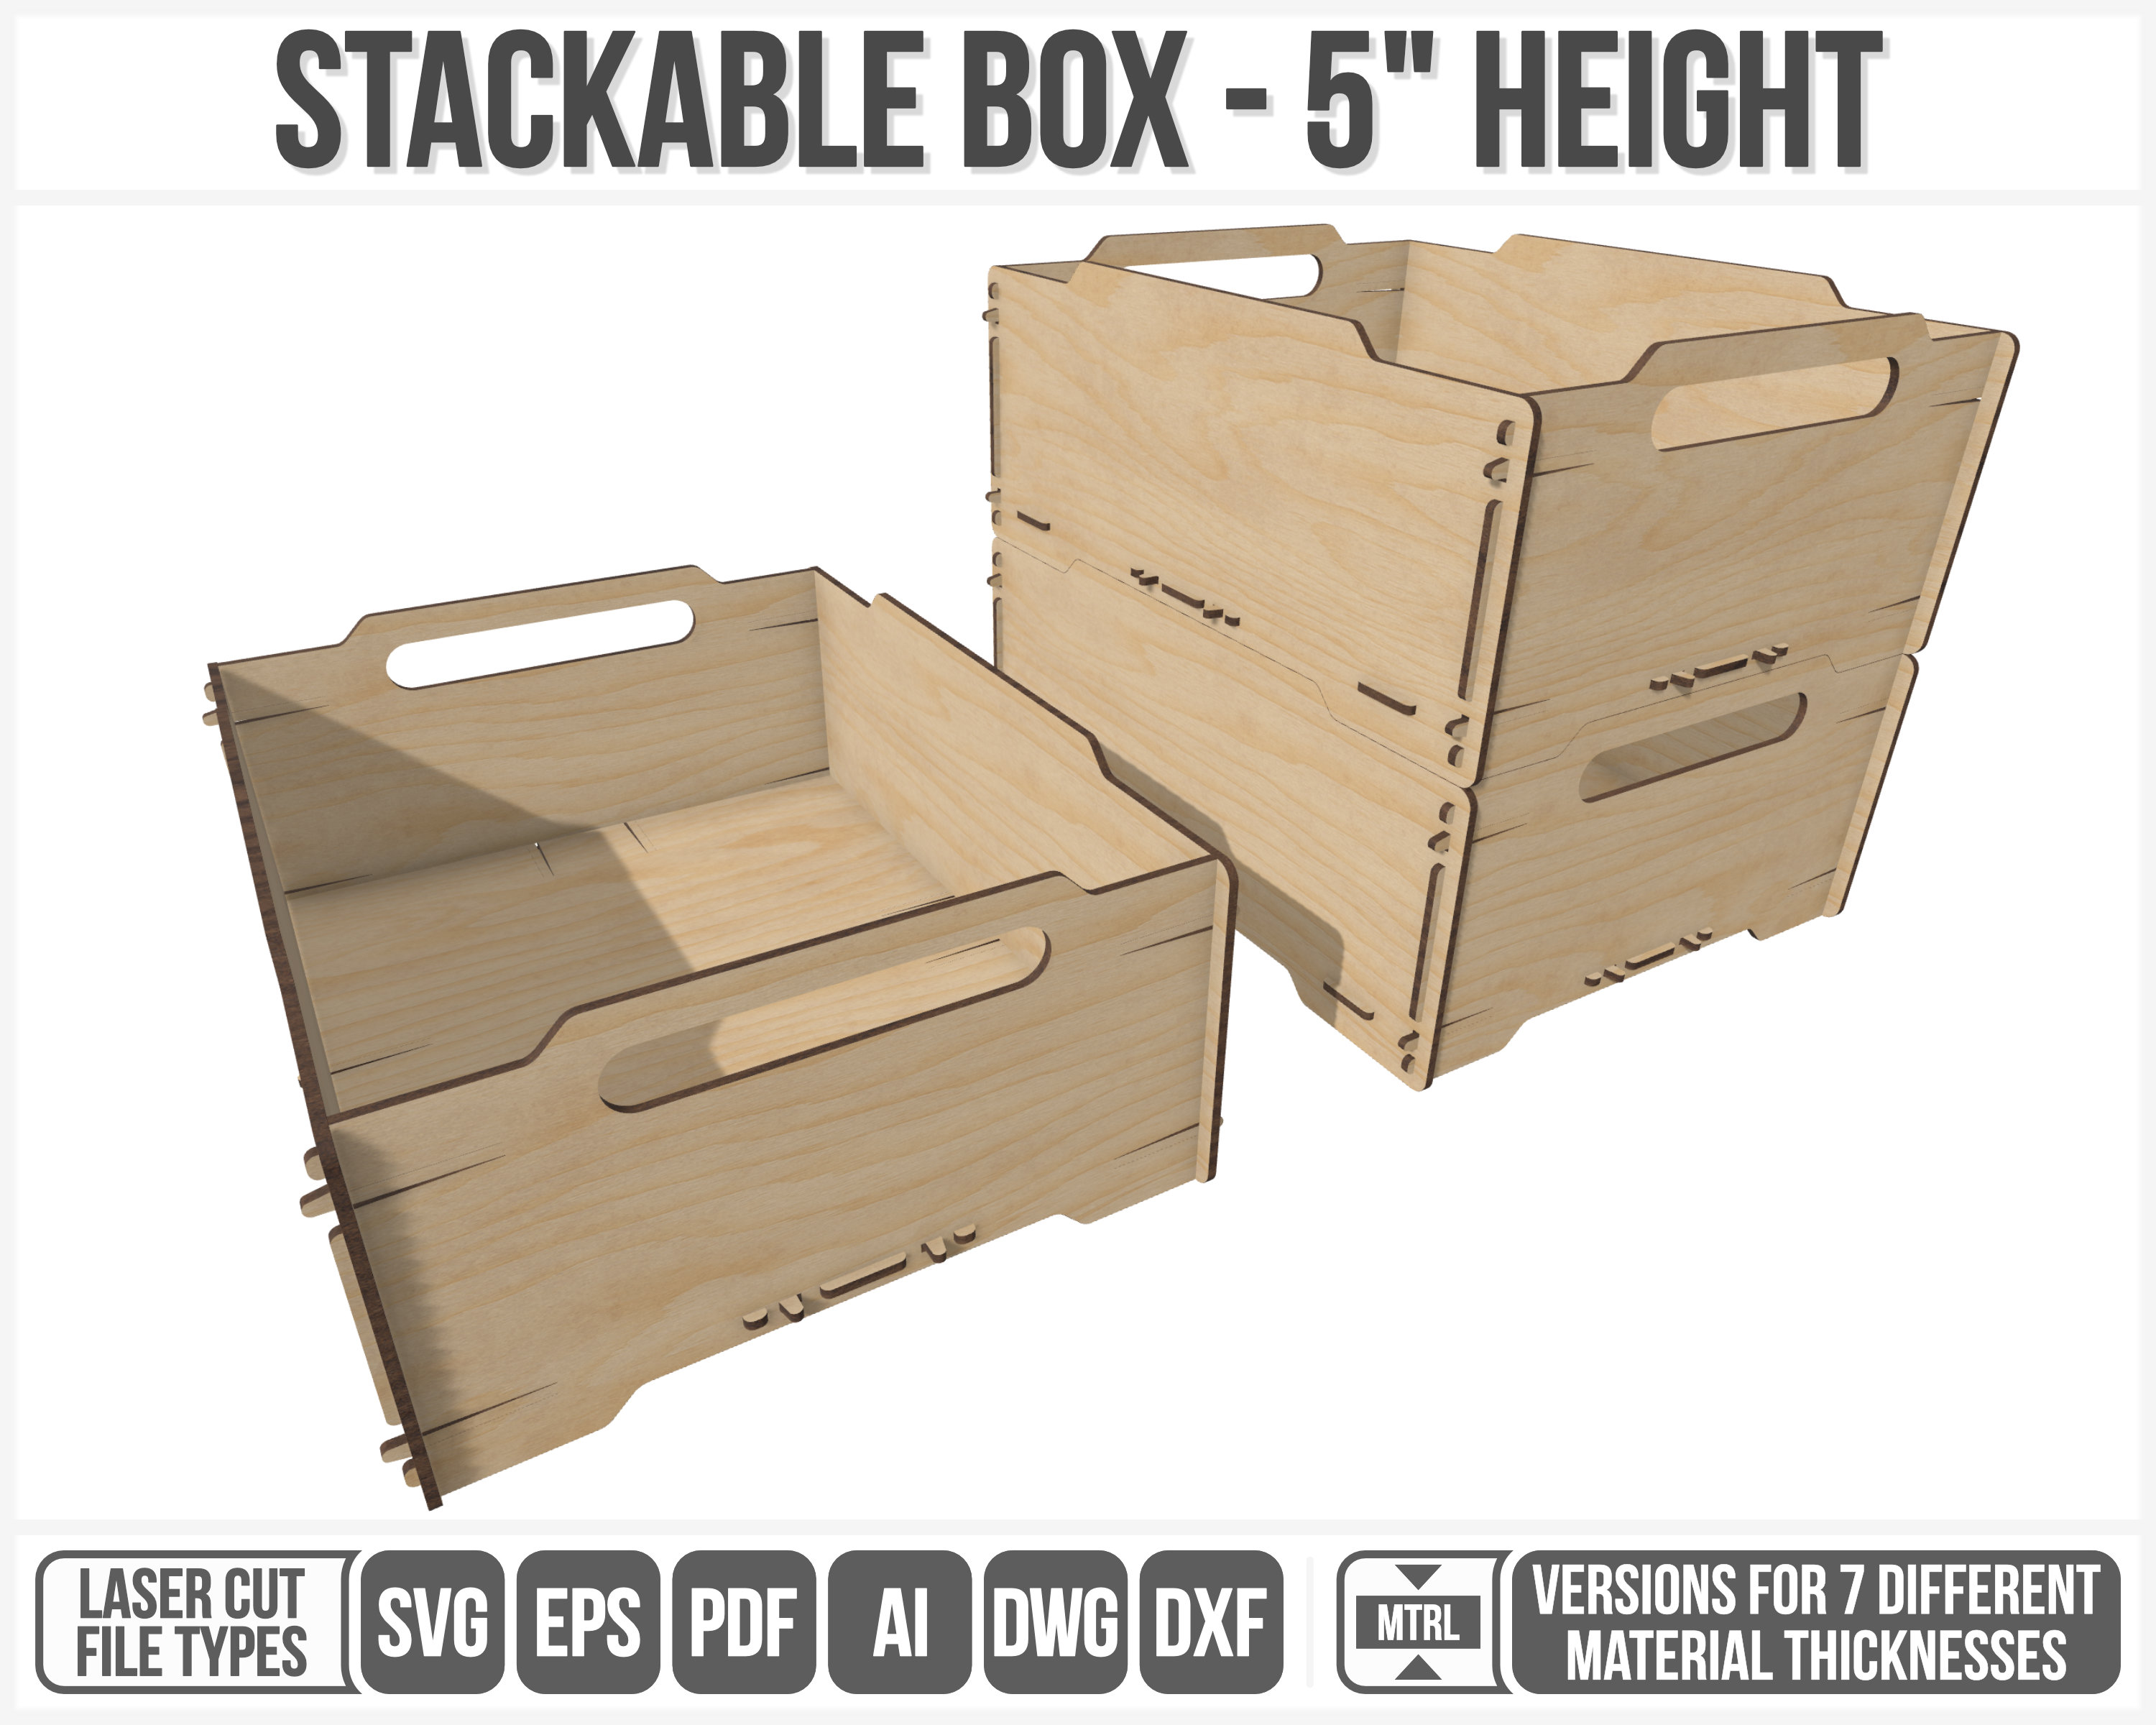 Stackable Box 5 Height Laser Cut Files 